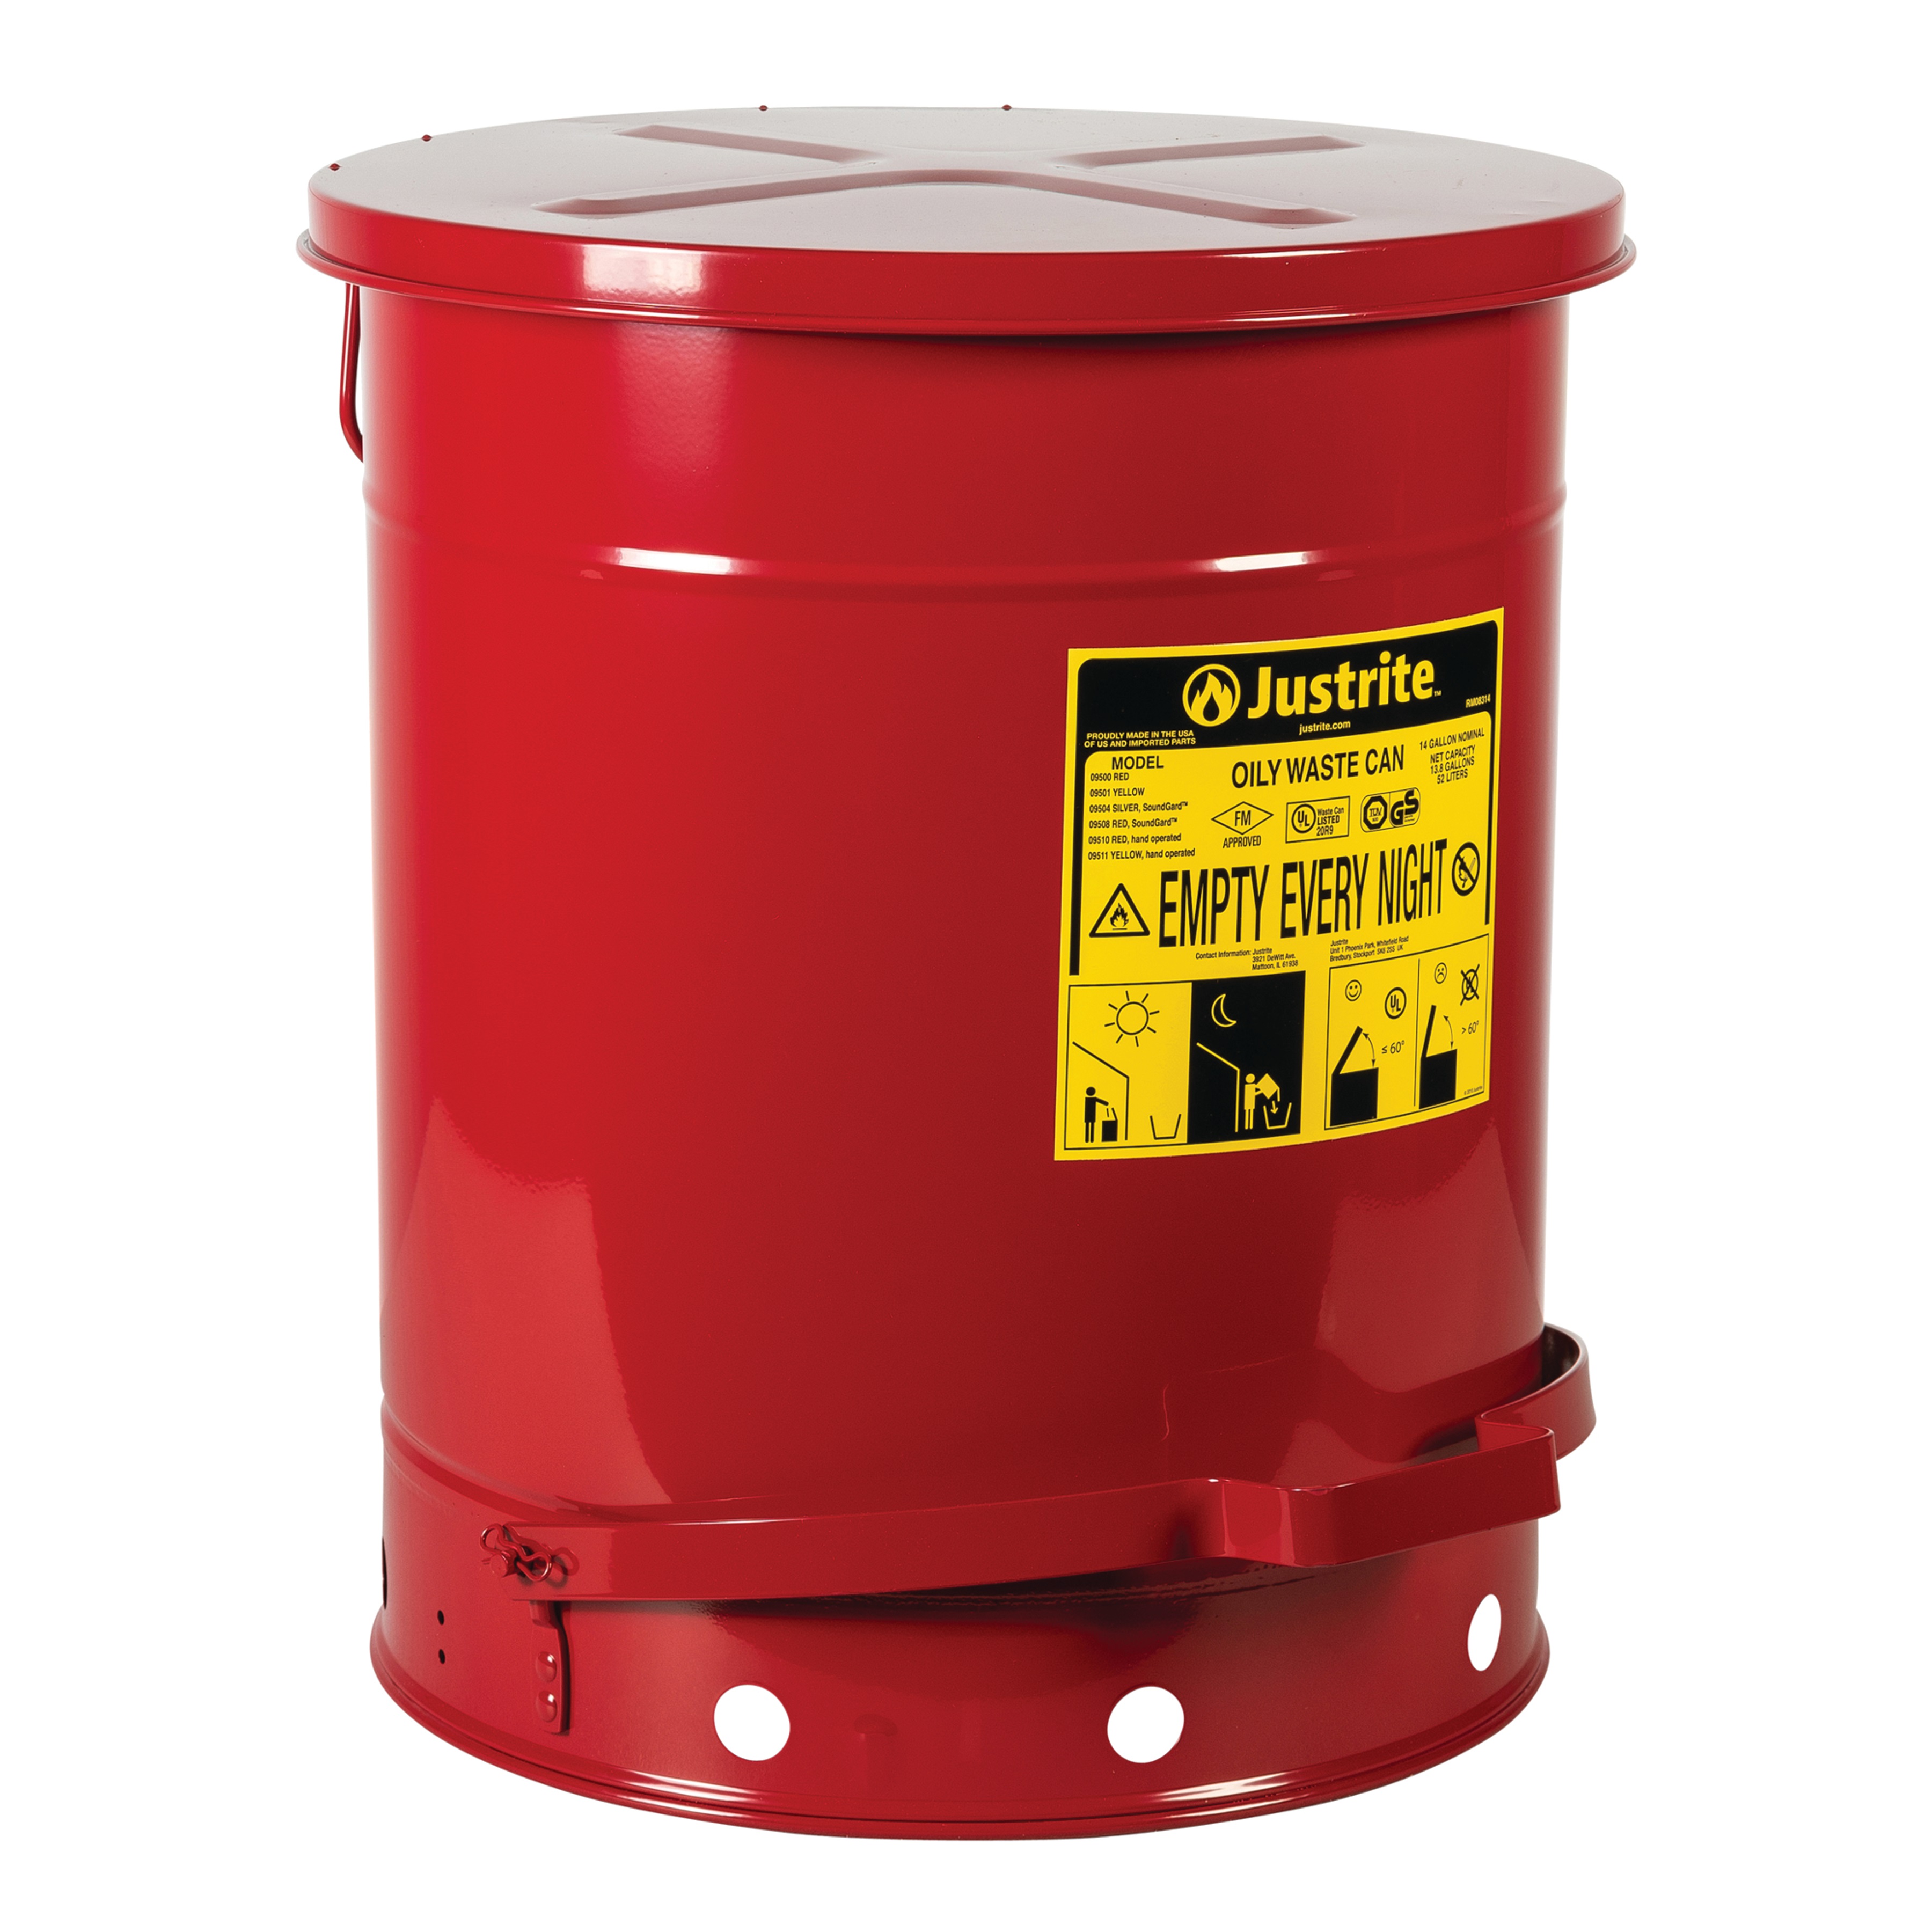 Justrite Oily Waste Cans - Red - Foot Operated - Spill Containment